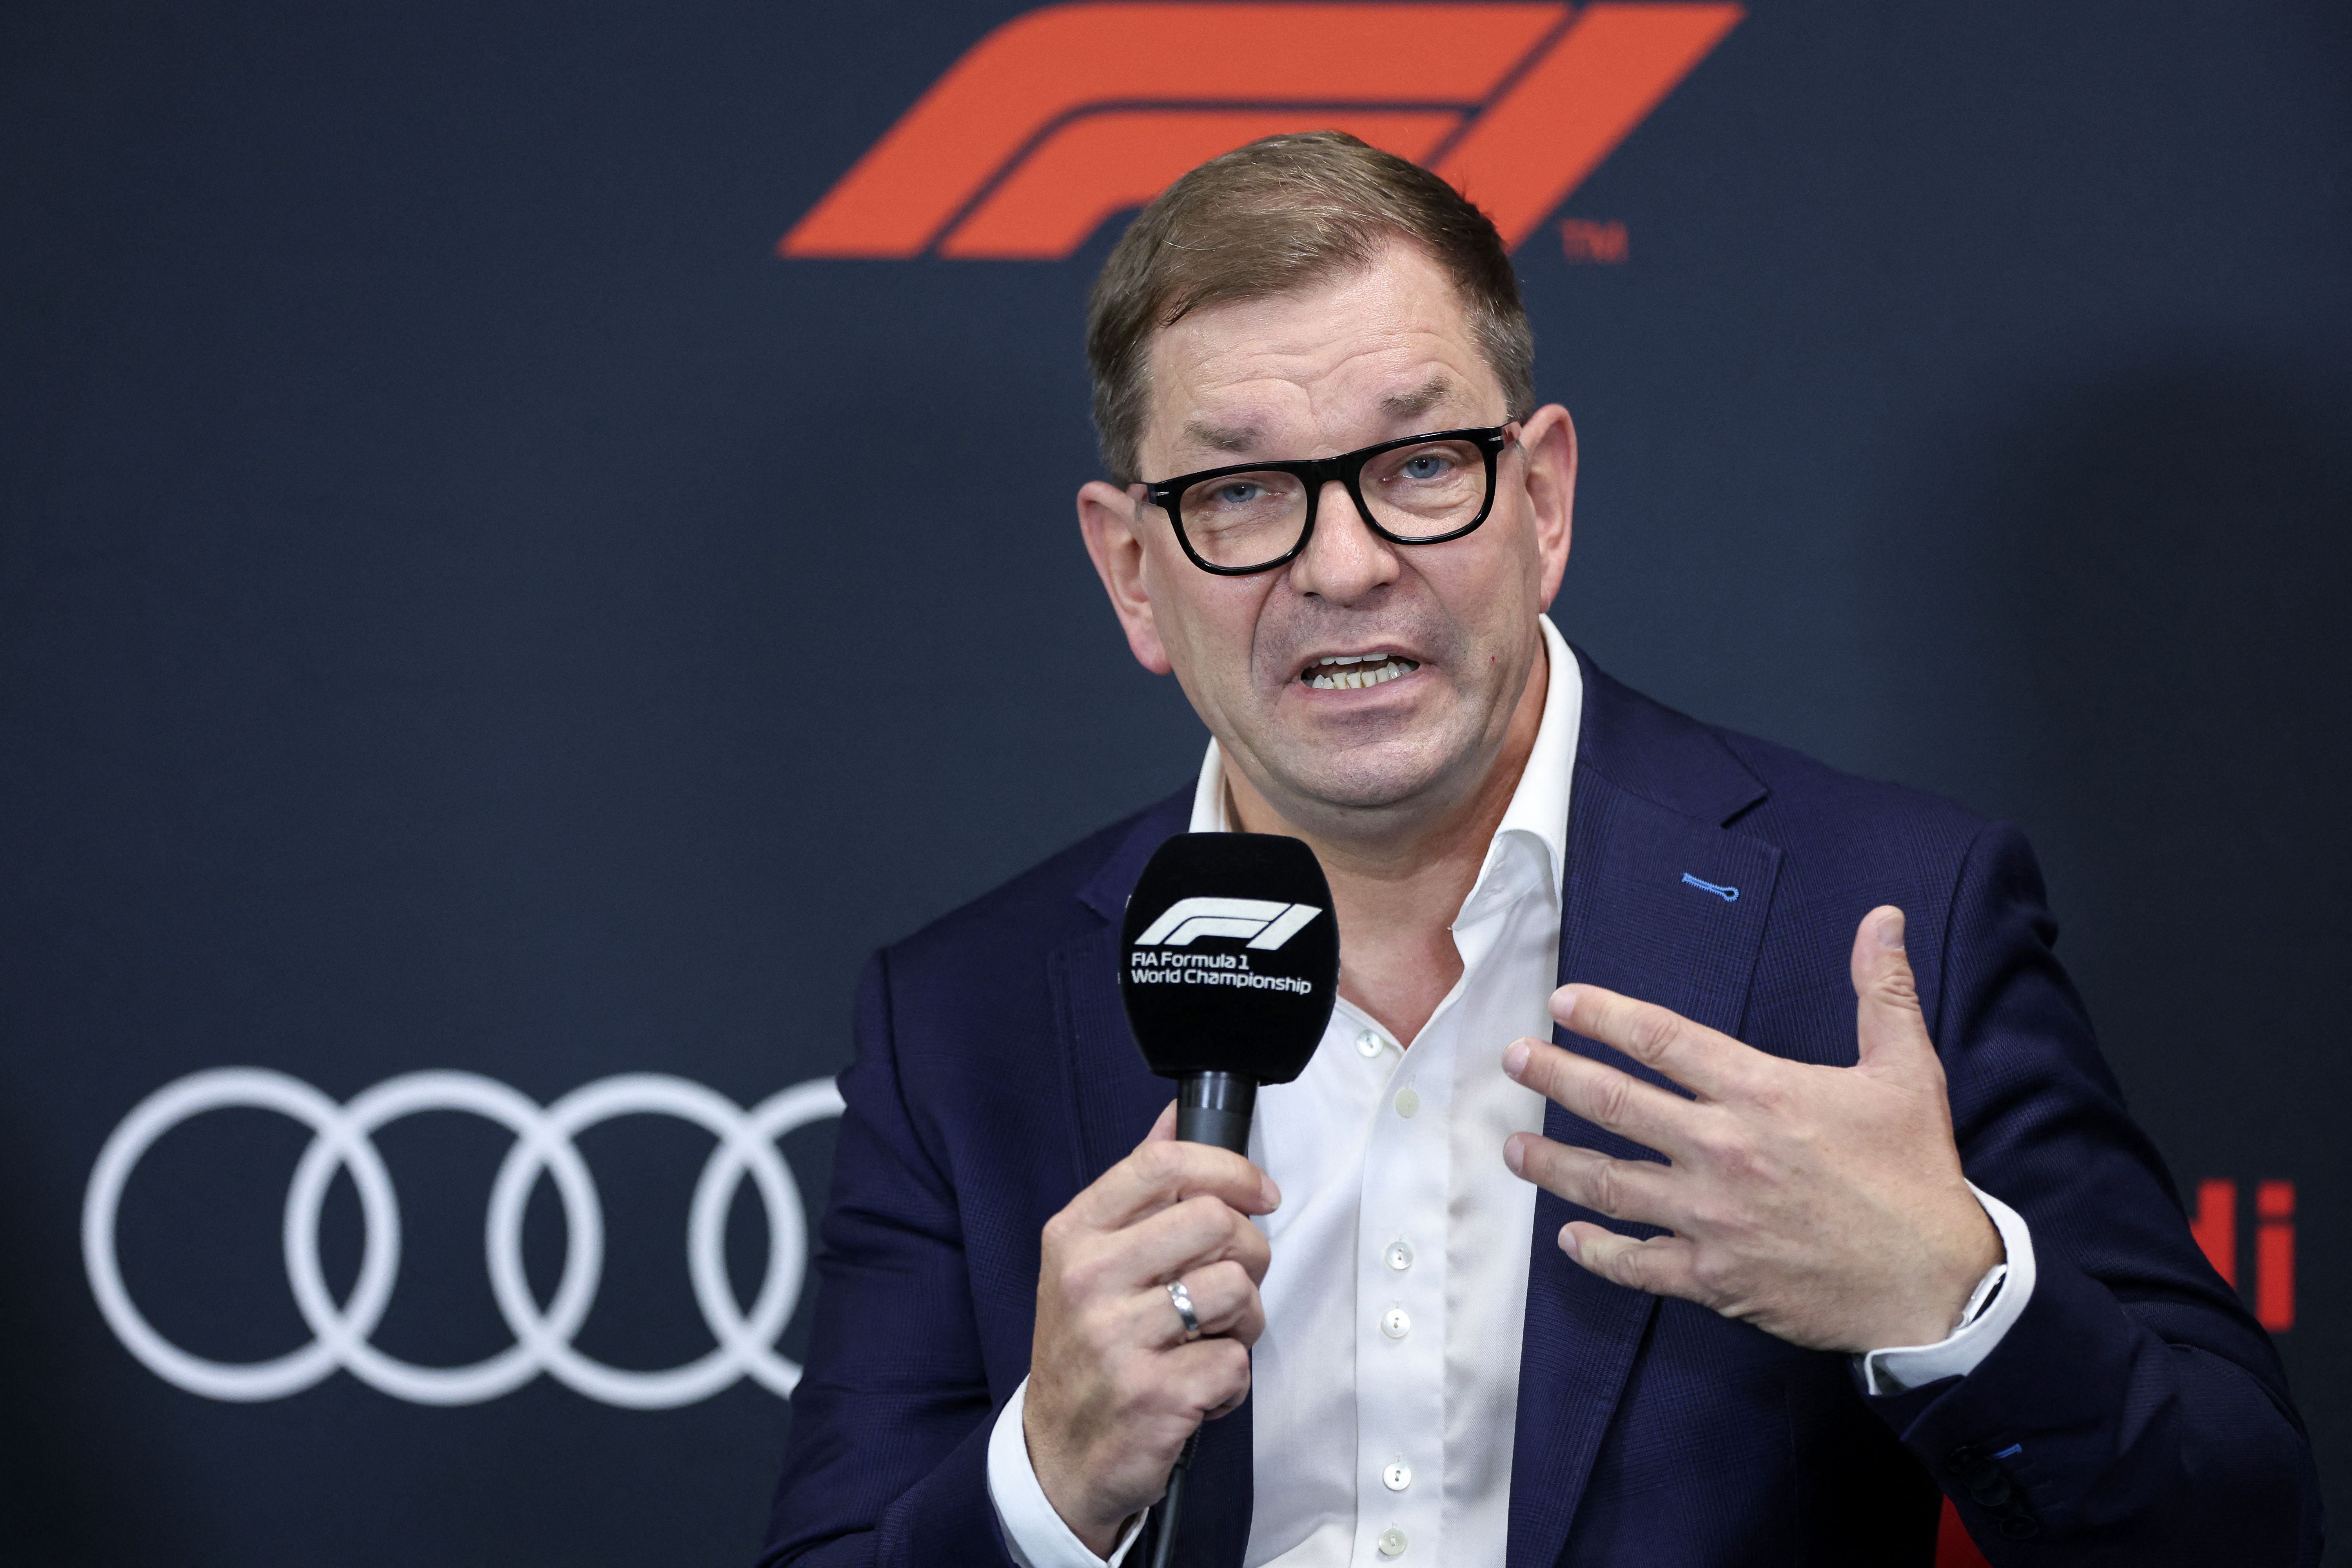 Chairman of the Board of Management of AUDI AG Markus Duesmann emphasised that “motorsport is an integral part of Audi’s DNA”